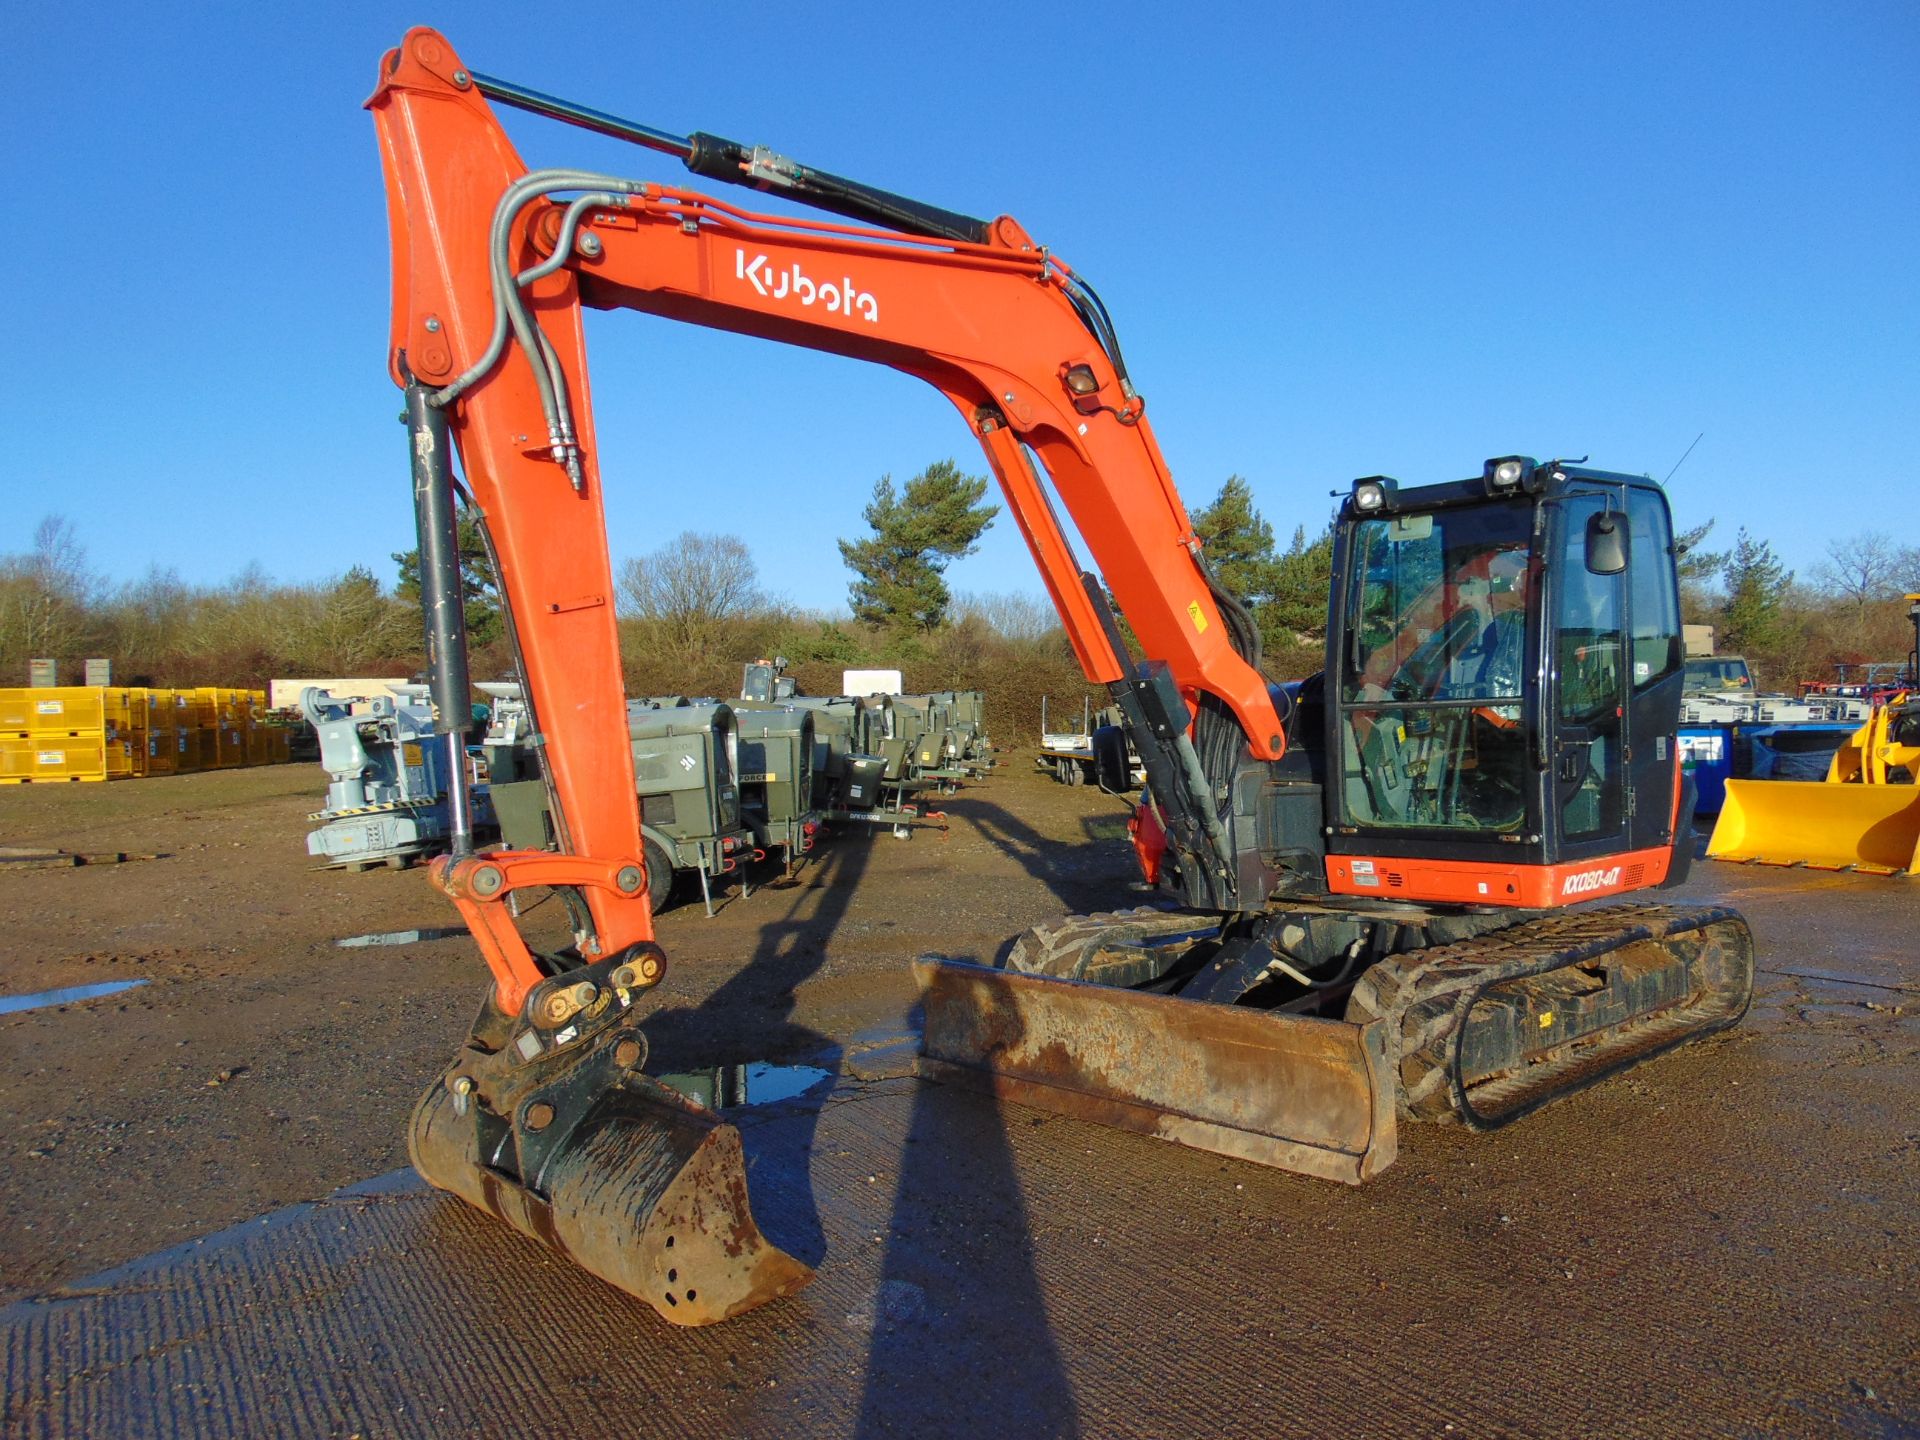 2017 KUBOTA KX 080-4A Excavator 1212 Hrs Only Very High Specification with 3 Buckets Sno 42470 - Bild 2 aus 25